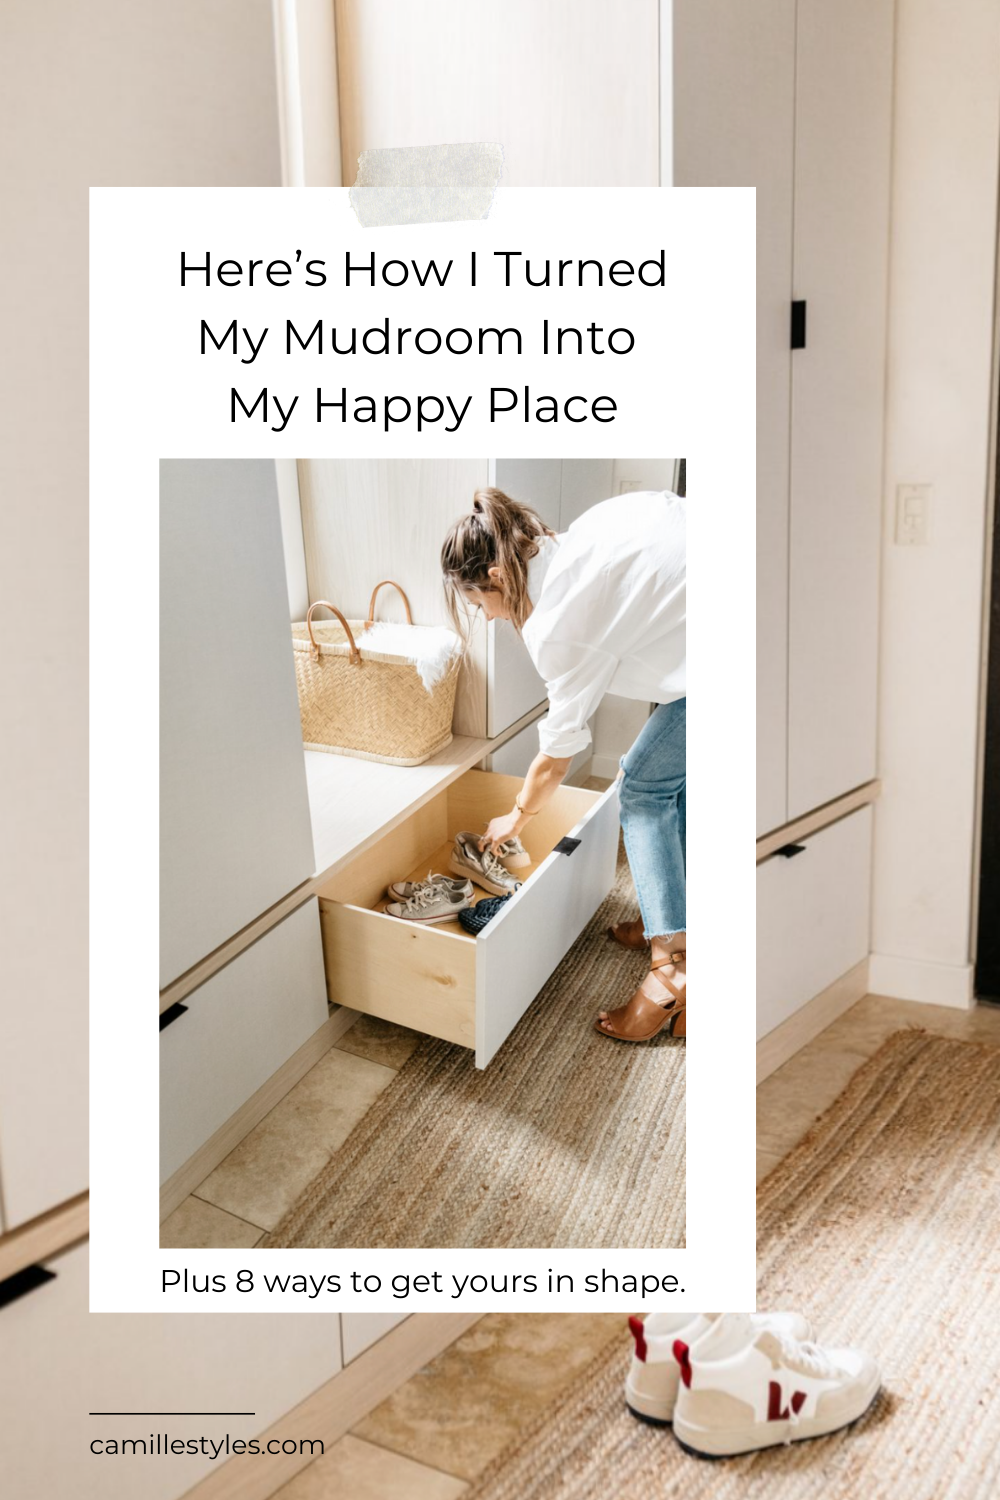 Pinterest_ My Mudroom Was a Disaster. Here’s How I Turned It Into My Happy Place